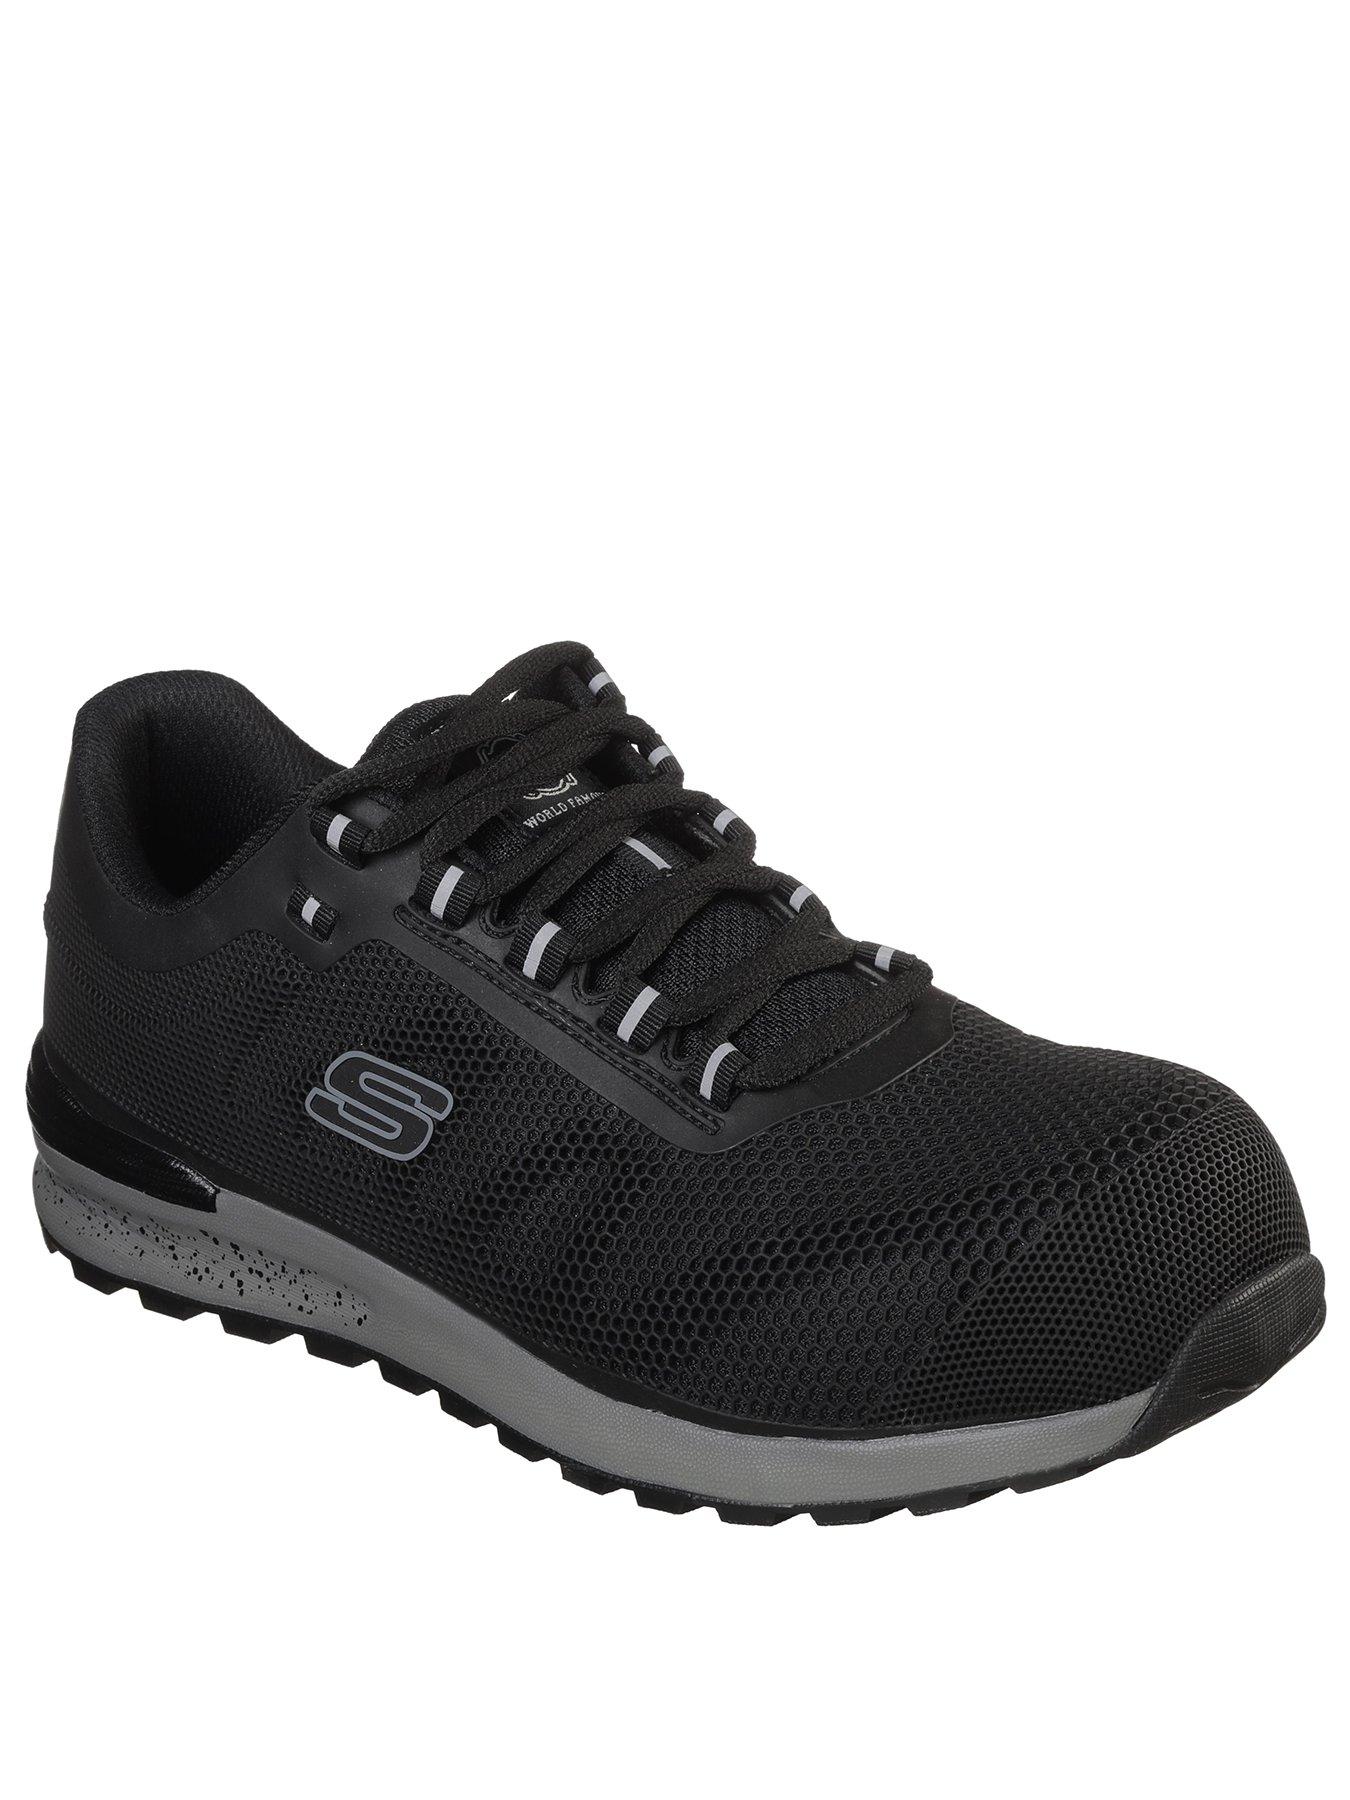 Shoes & boots Safety Bulklin Shoes - Black